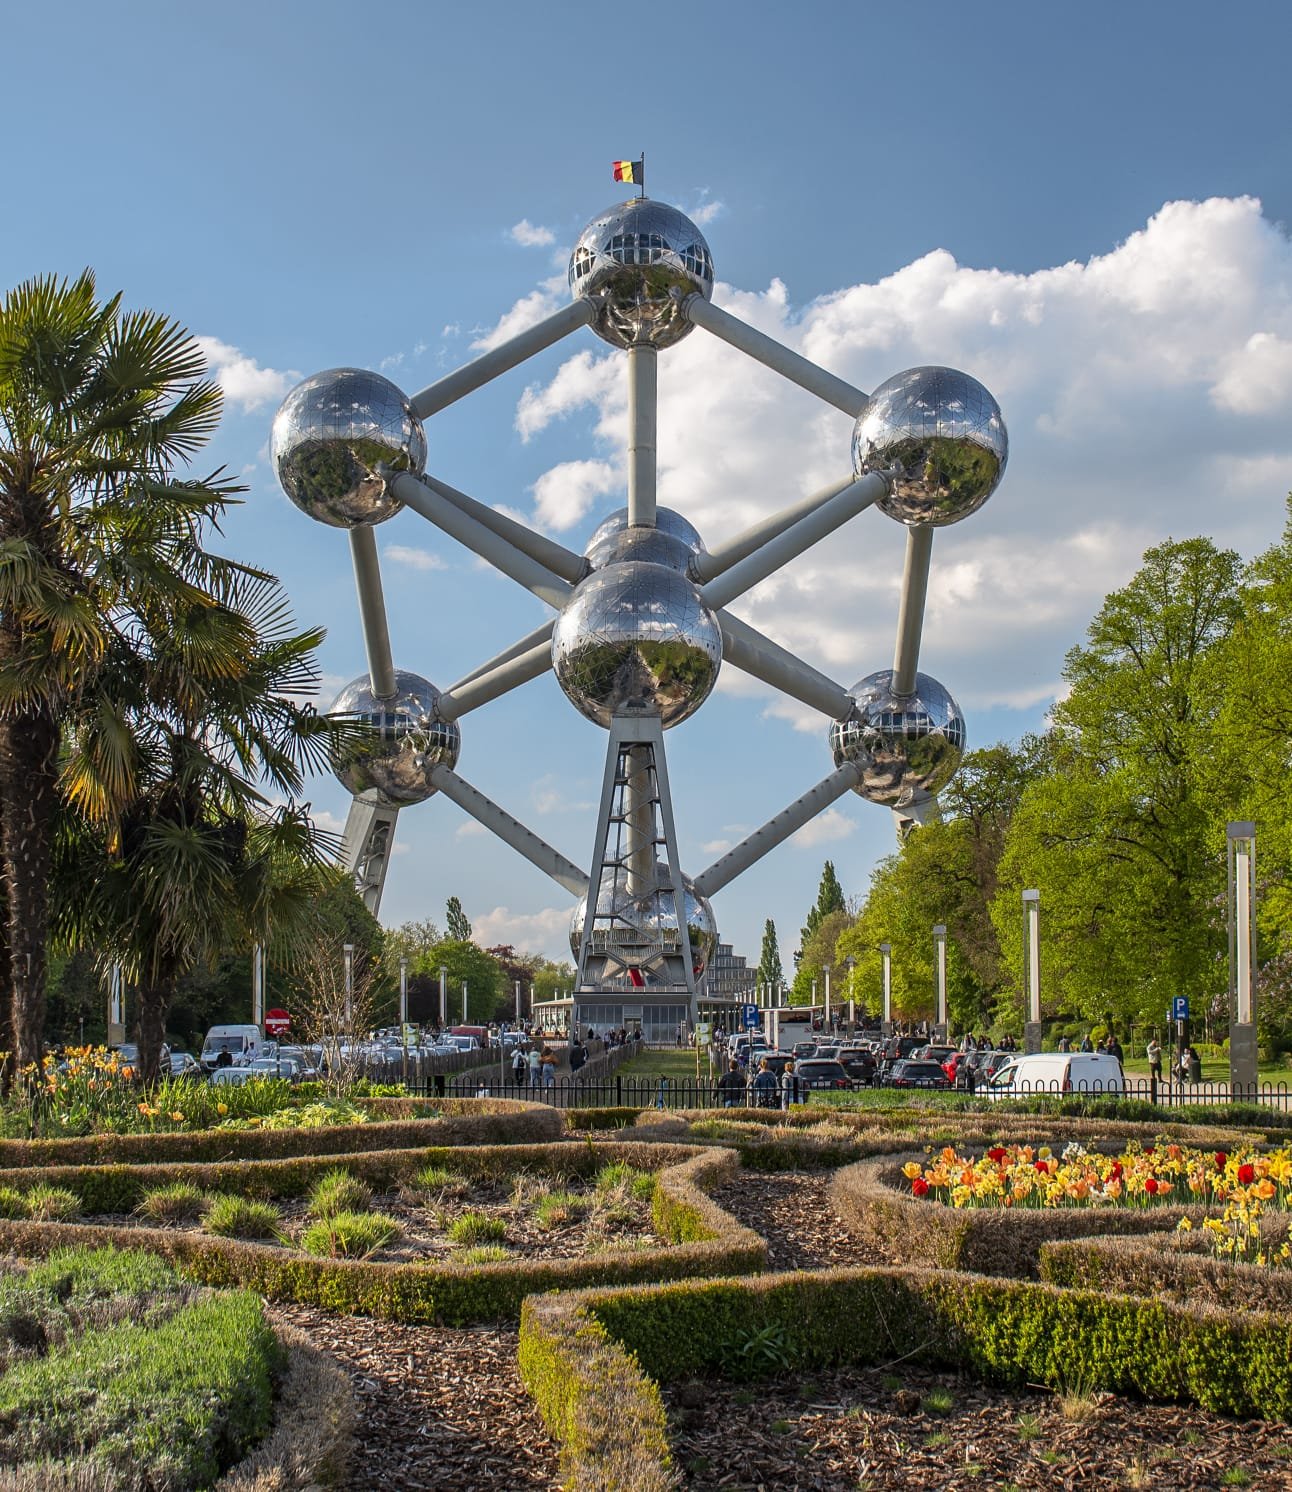 Day 4: Onto Brussels. Visit Grand Place And Manneken Pis Statue Photo Stop At Atomium